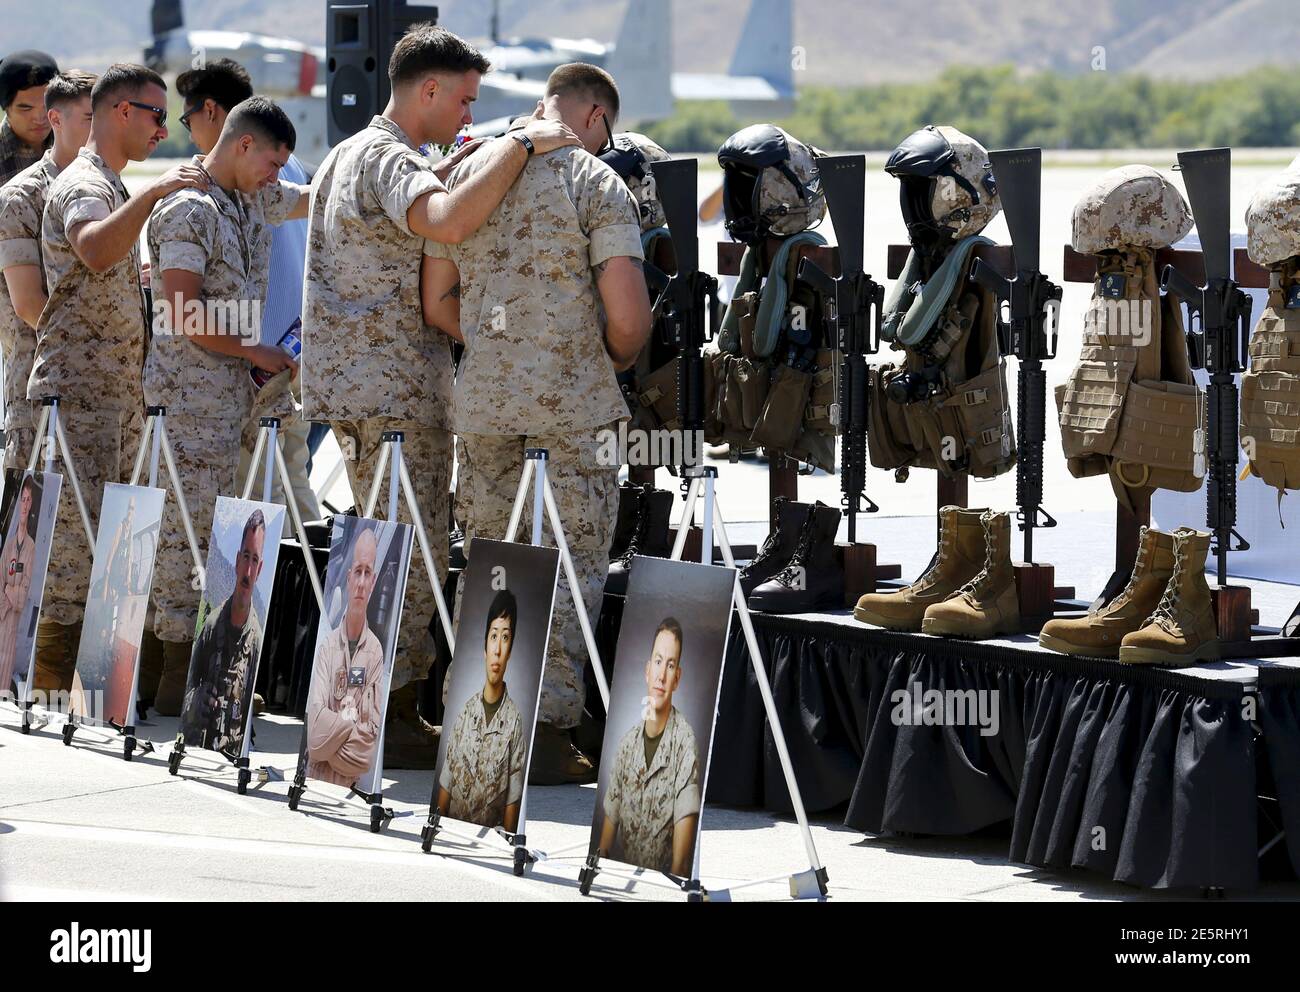 Fellow marines pay their respects to members of the 3rd Marine Aircraft Wing, who were killed in the crash of their military helicopter while coming to the aid of earthquake victims in Nepal, during a memorial service at Camp Pendleton, California June 3, 2015. REUTERS/Mike Blake Stock Photo